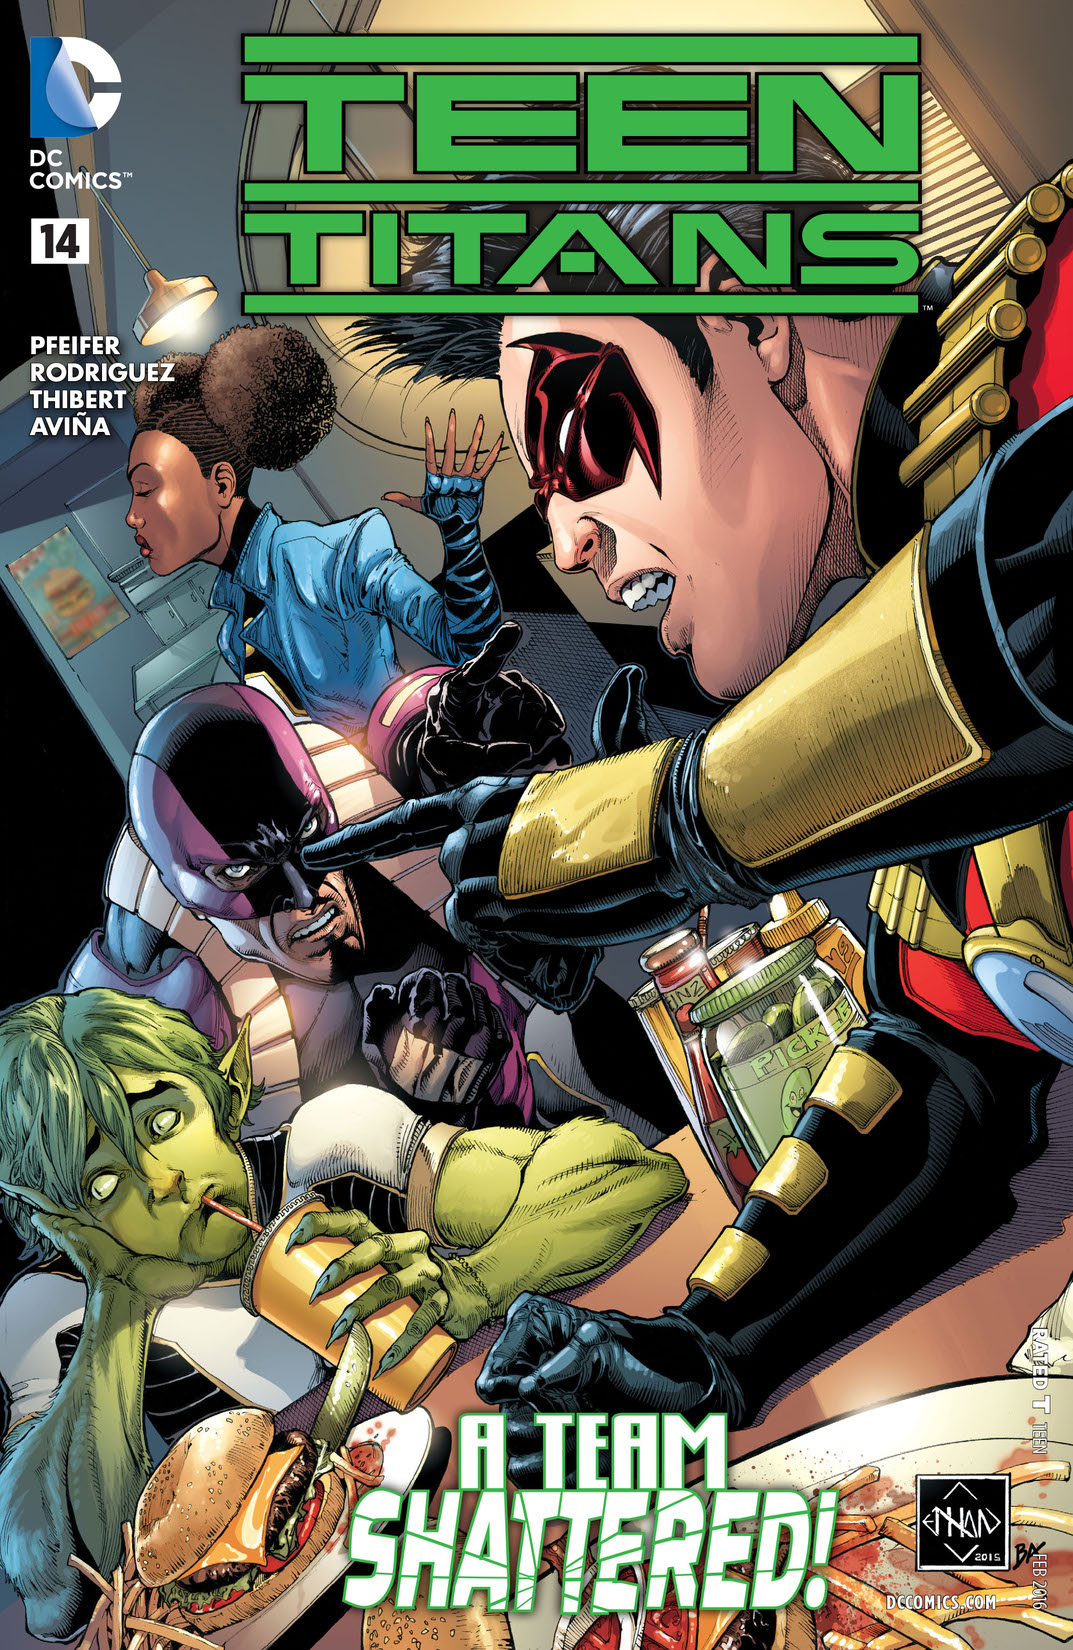 Teen Titans (2014-) #14 preview images